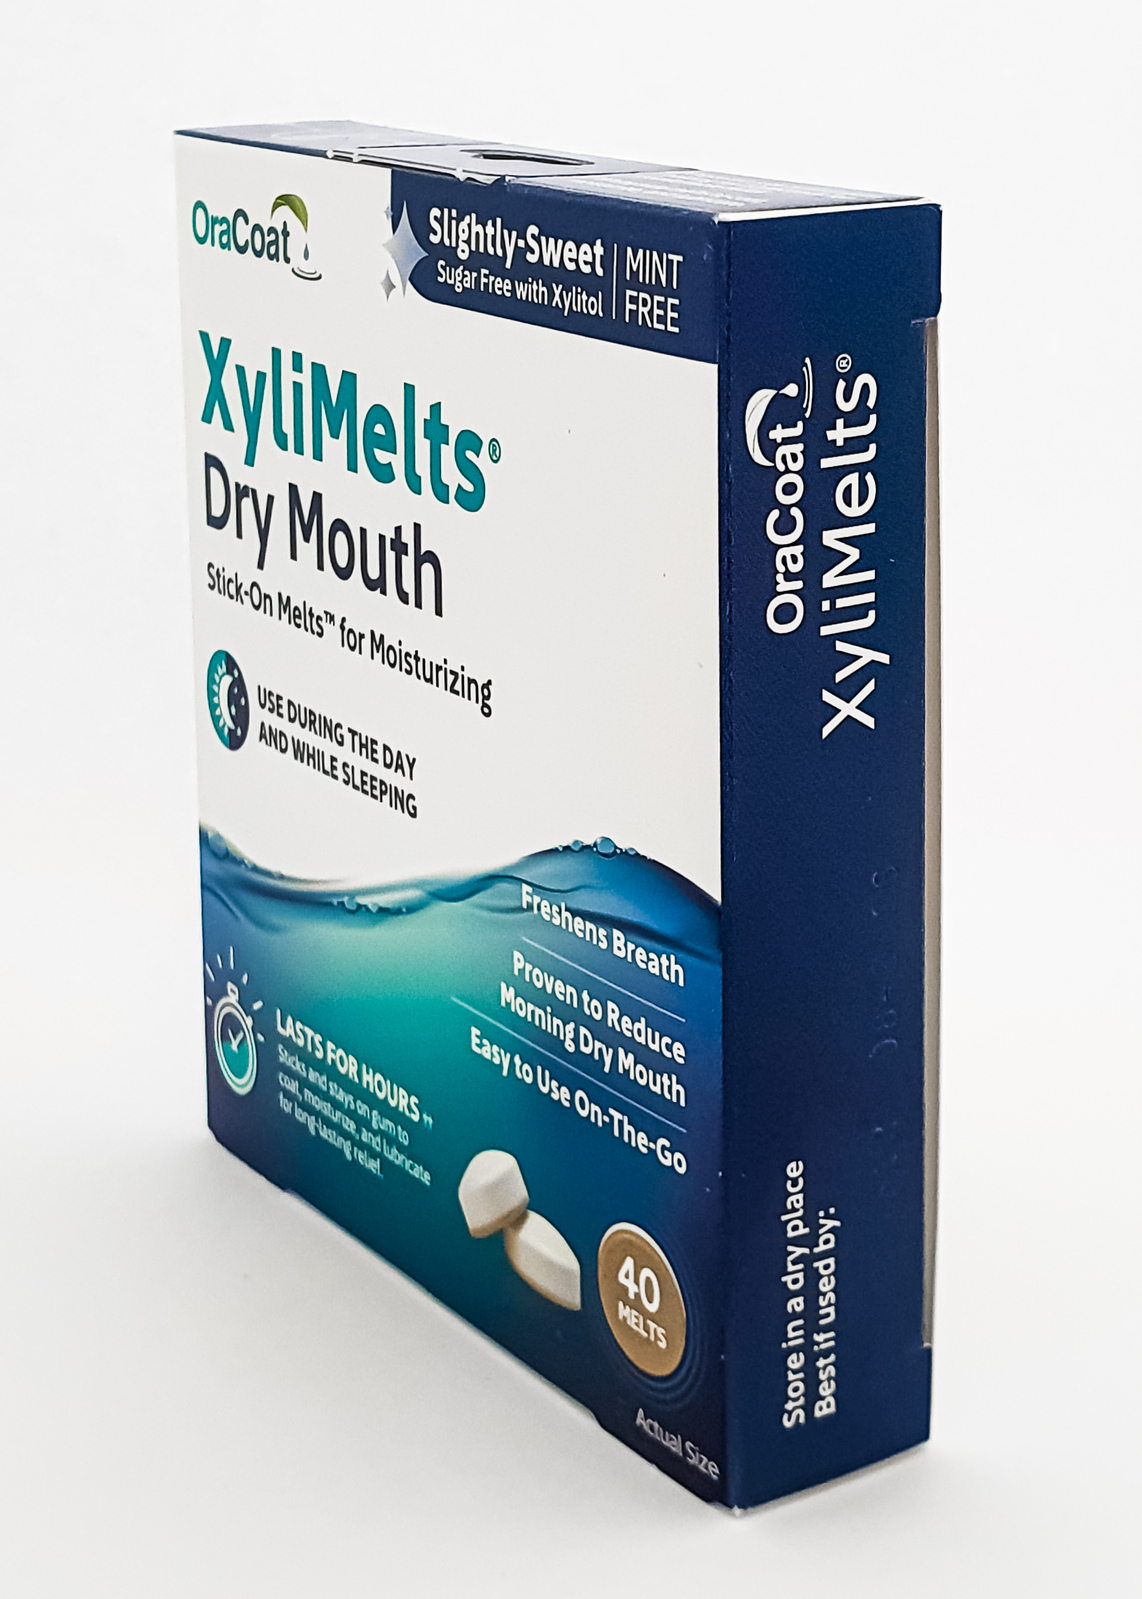 OraCoat XyliMelts Dry Mouth and Bad Breath